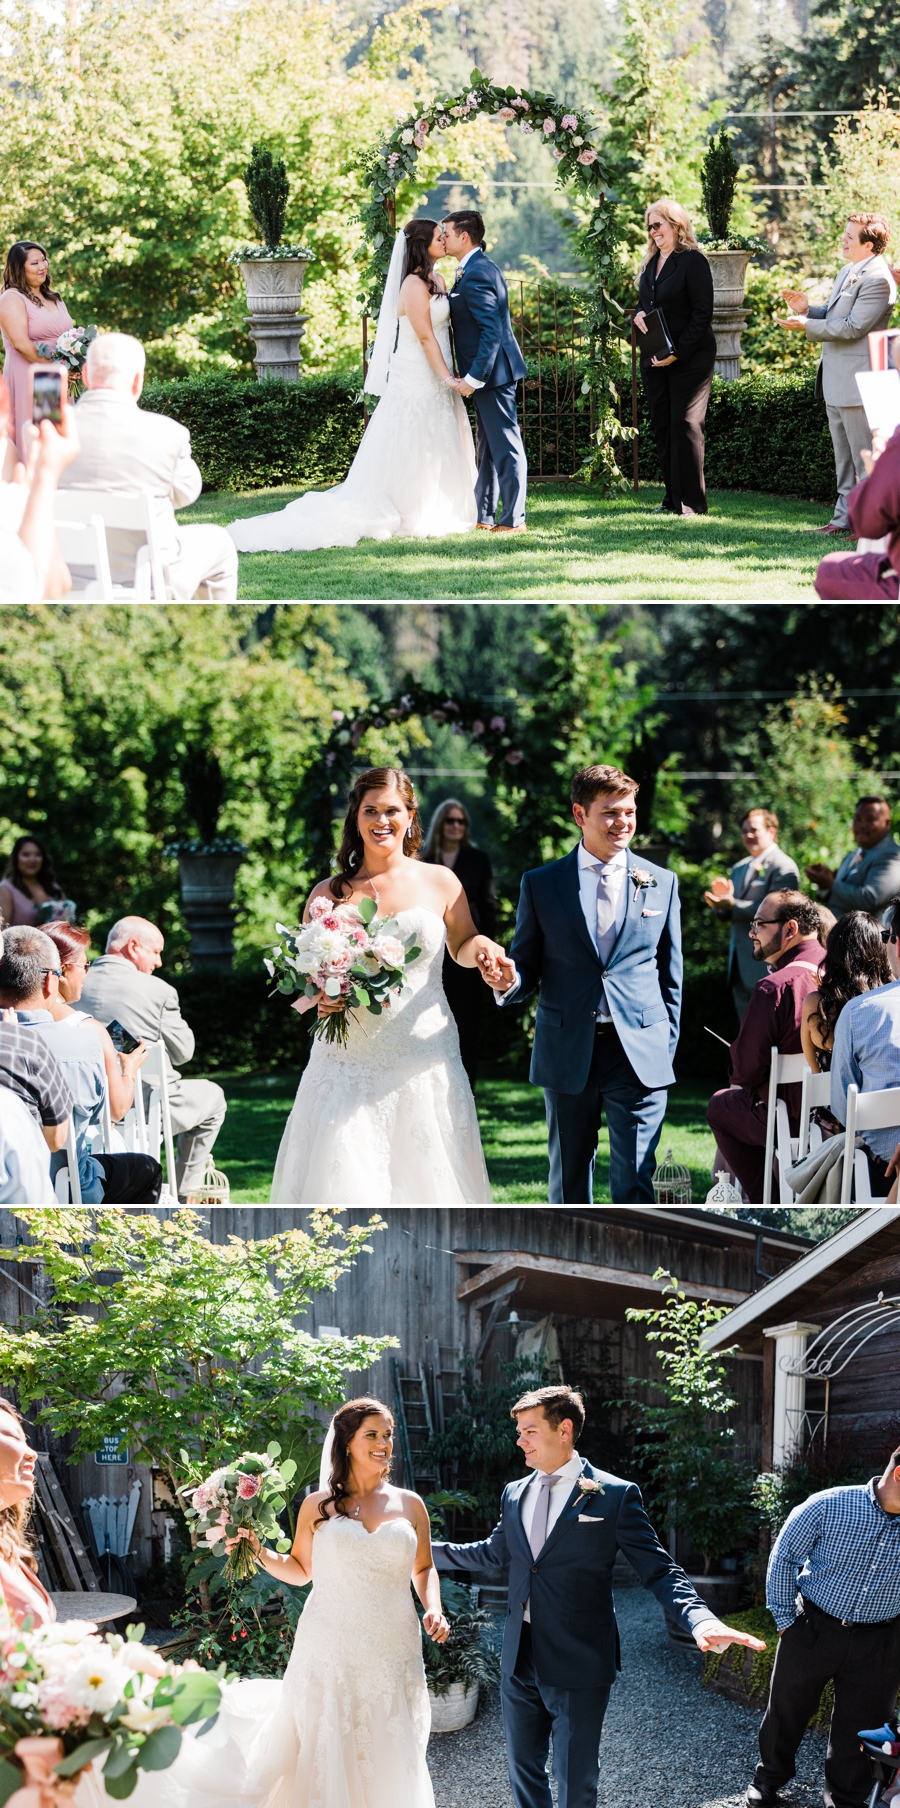 Wedding ceremony at Snohomish wedding venue Green Gates at Flowing Lake by Seattle wedding photographer Amy Galbraith